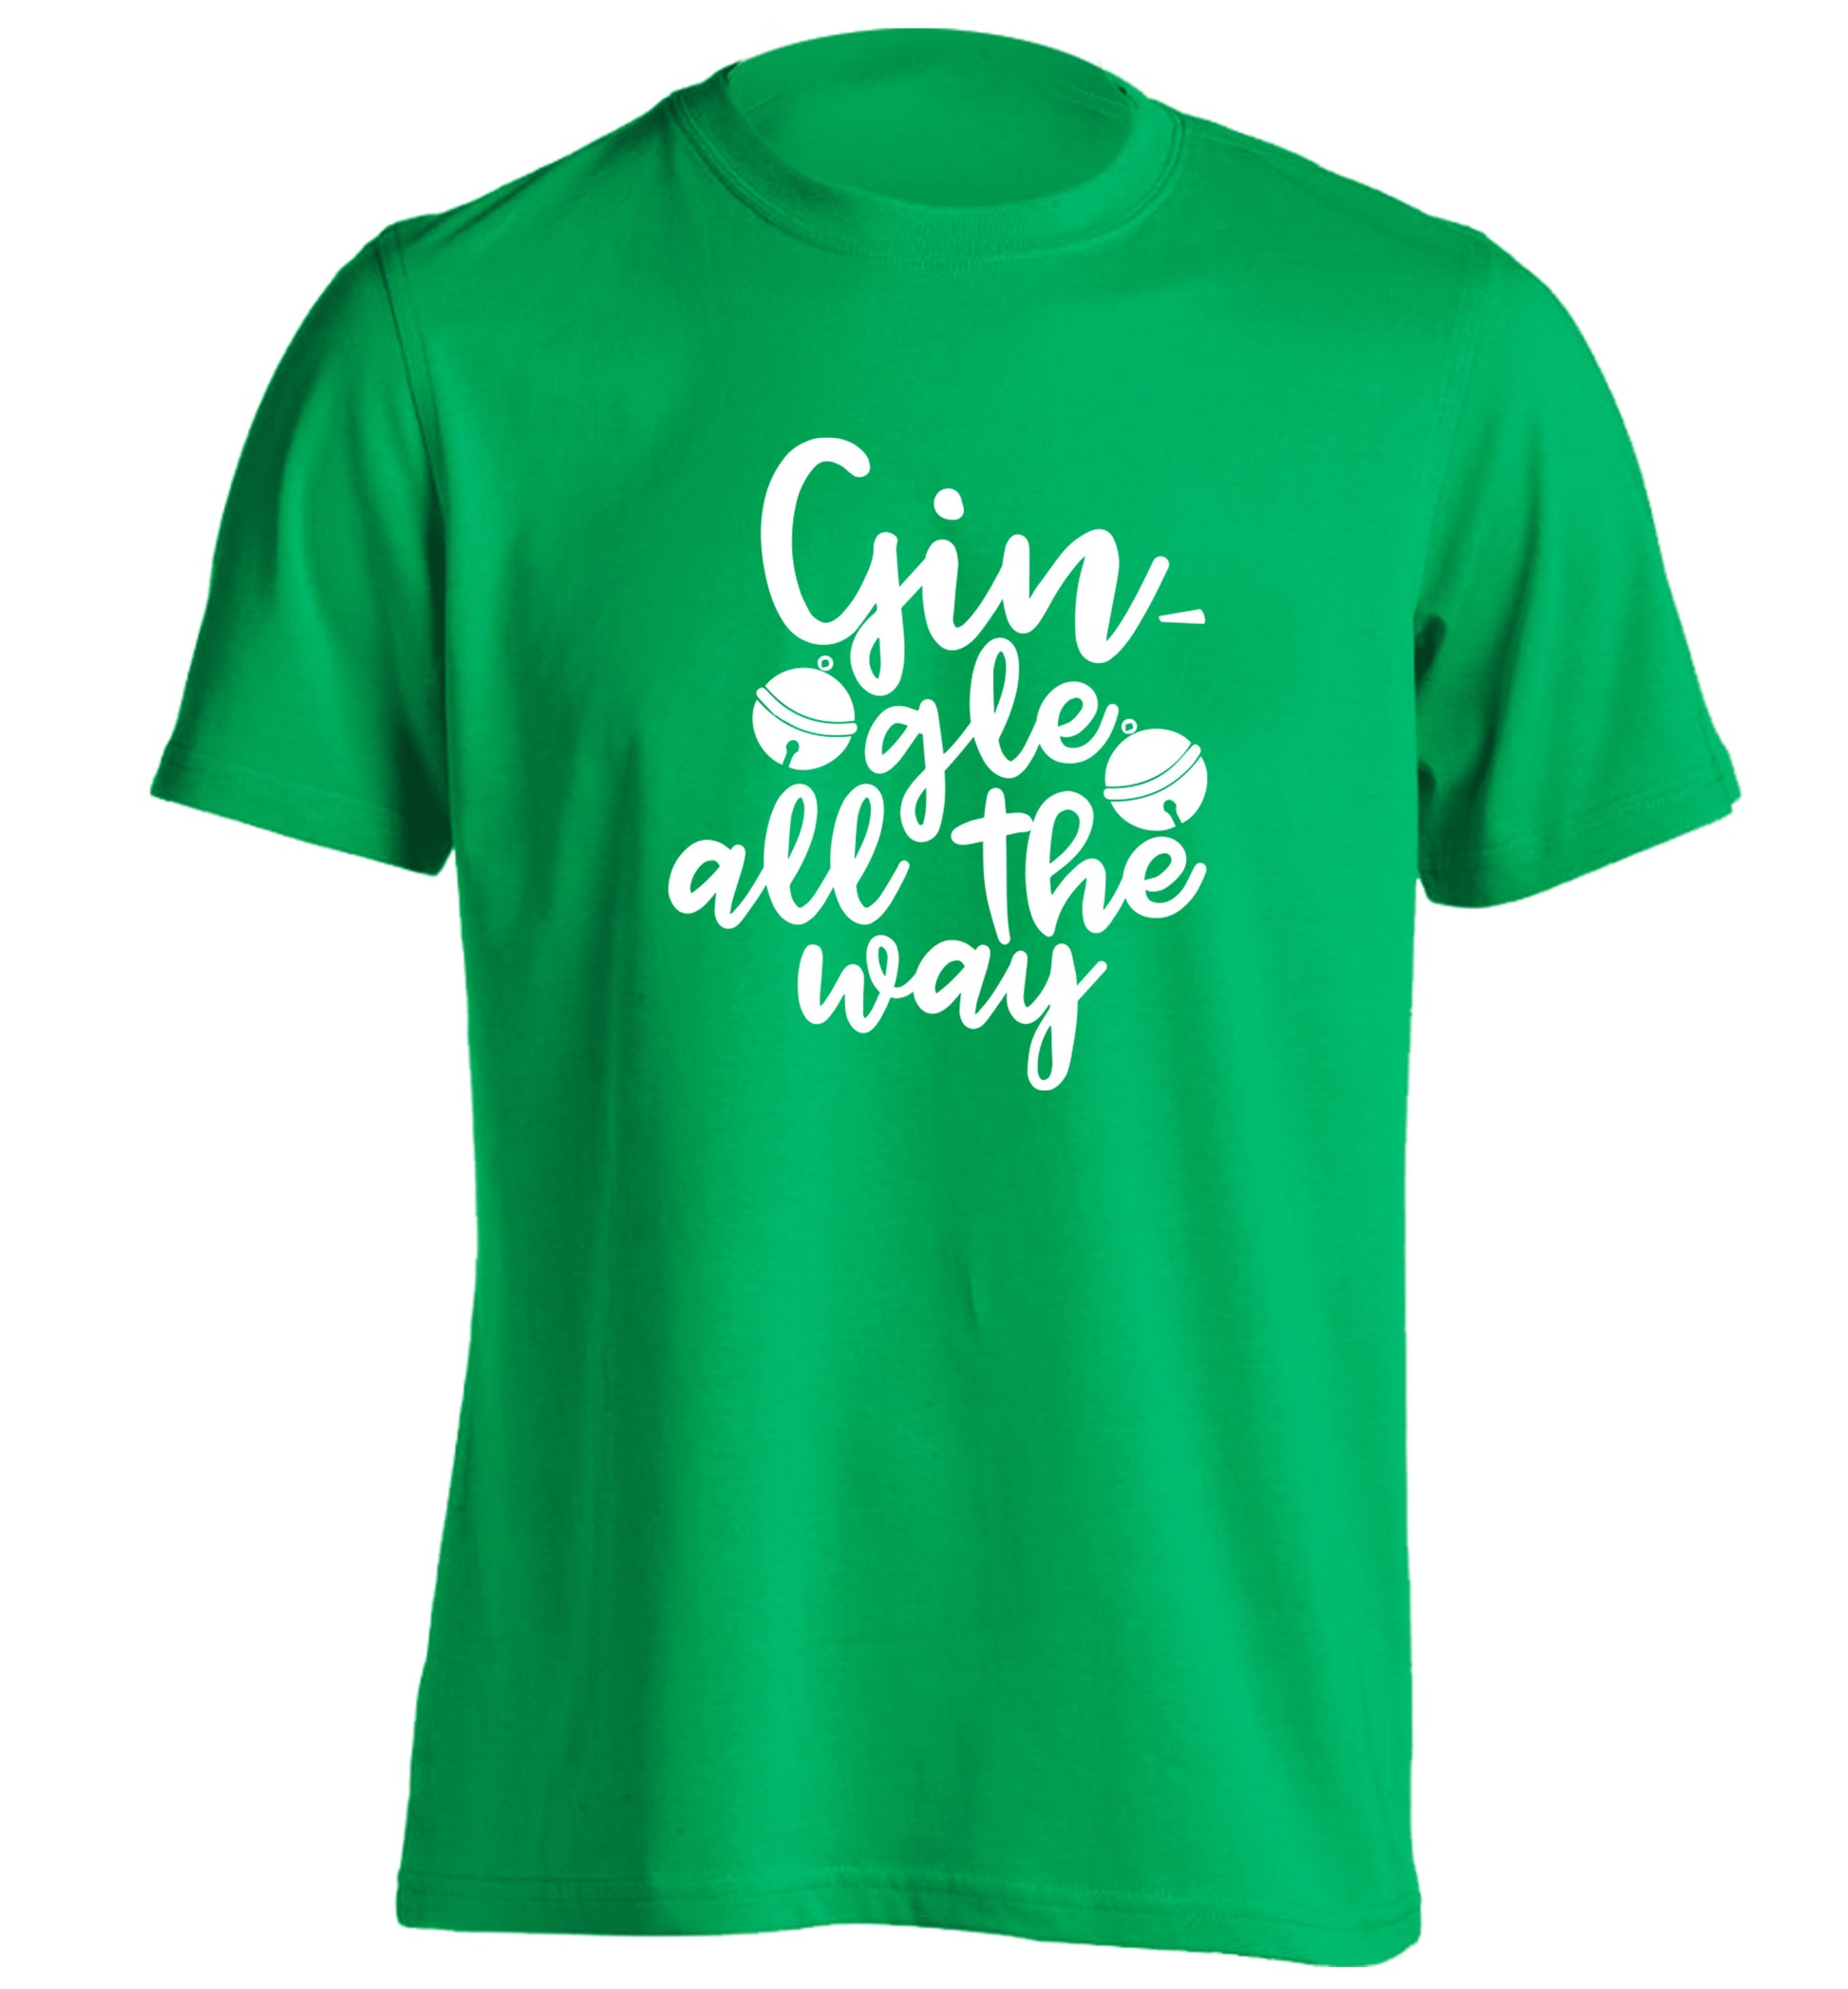 Gin-gle all the way adults unisex green Tshirt 2XL